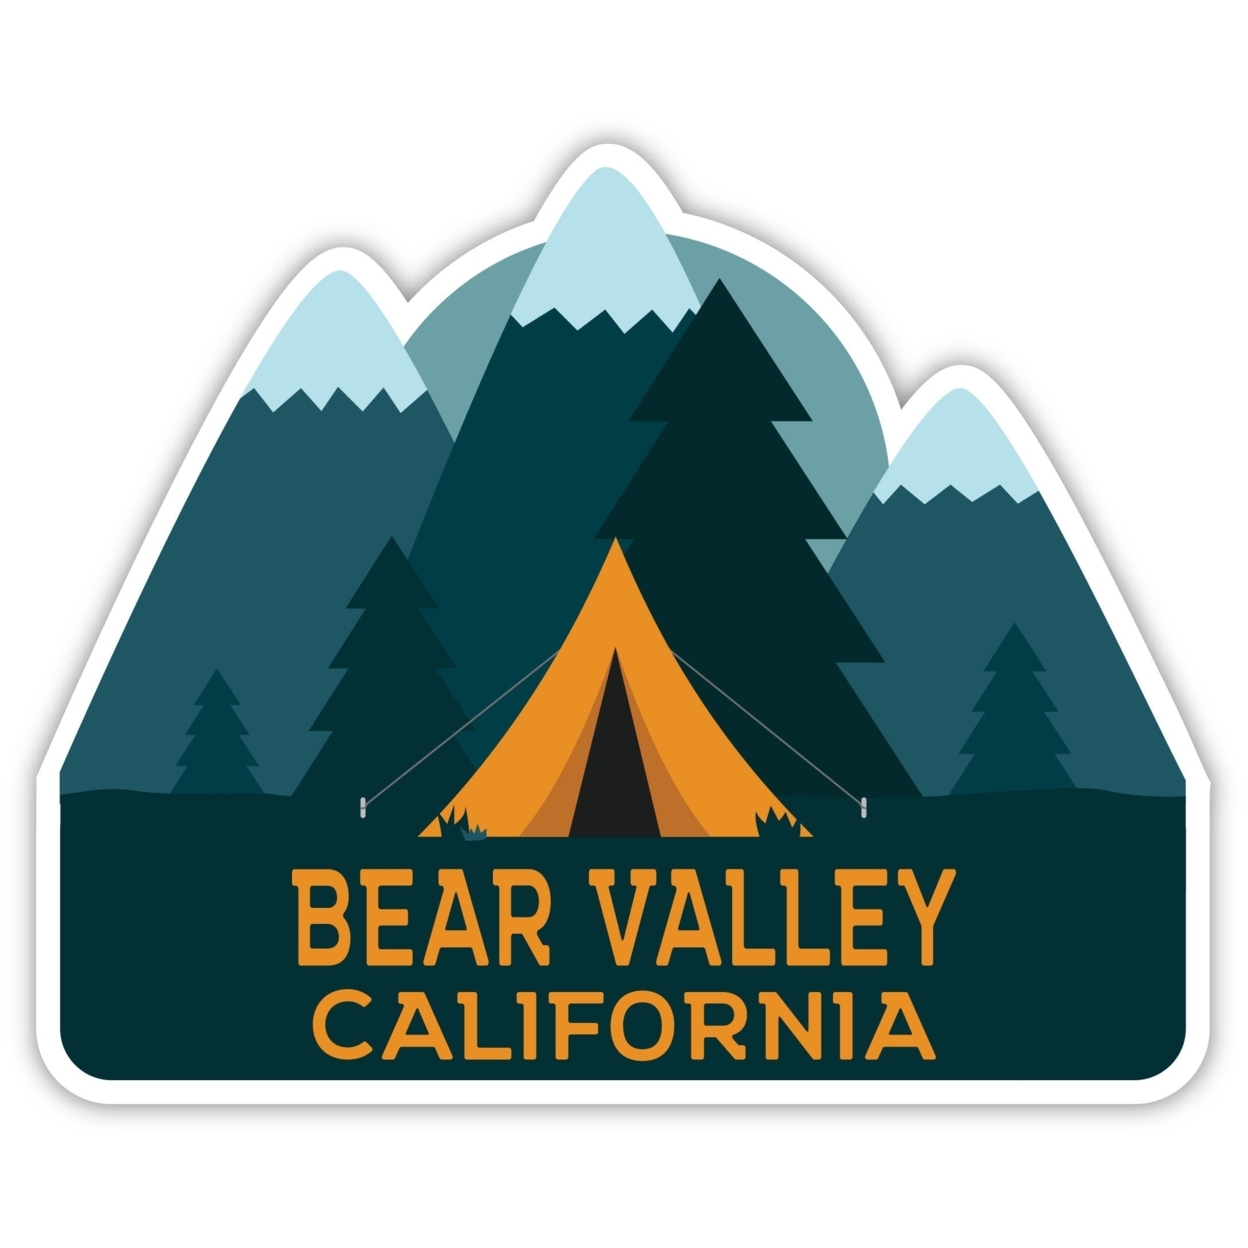 Bear Valley California Souvenir Decorative Stickers (Choose Theme And Size) - 4-Pack, 12-Inch, Tent